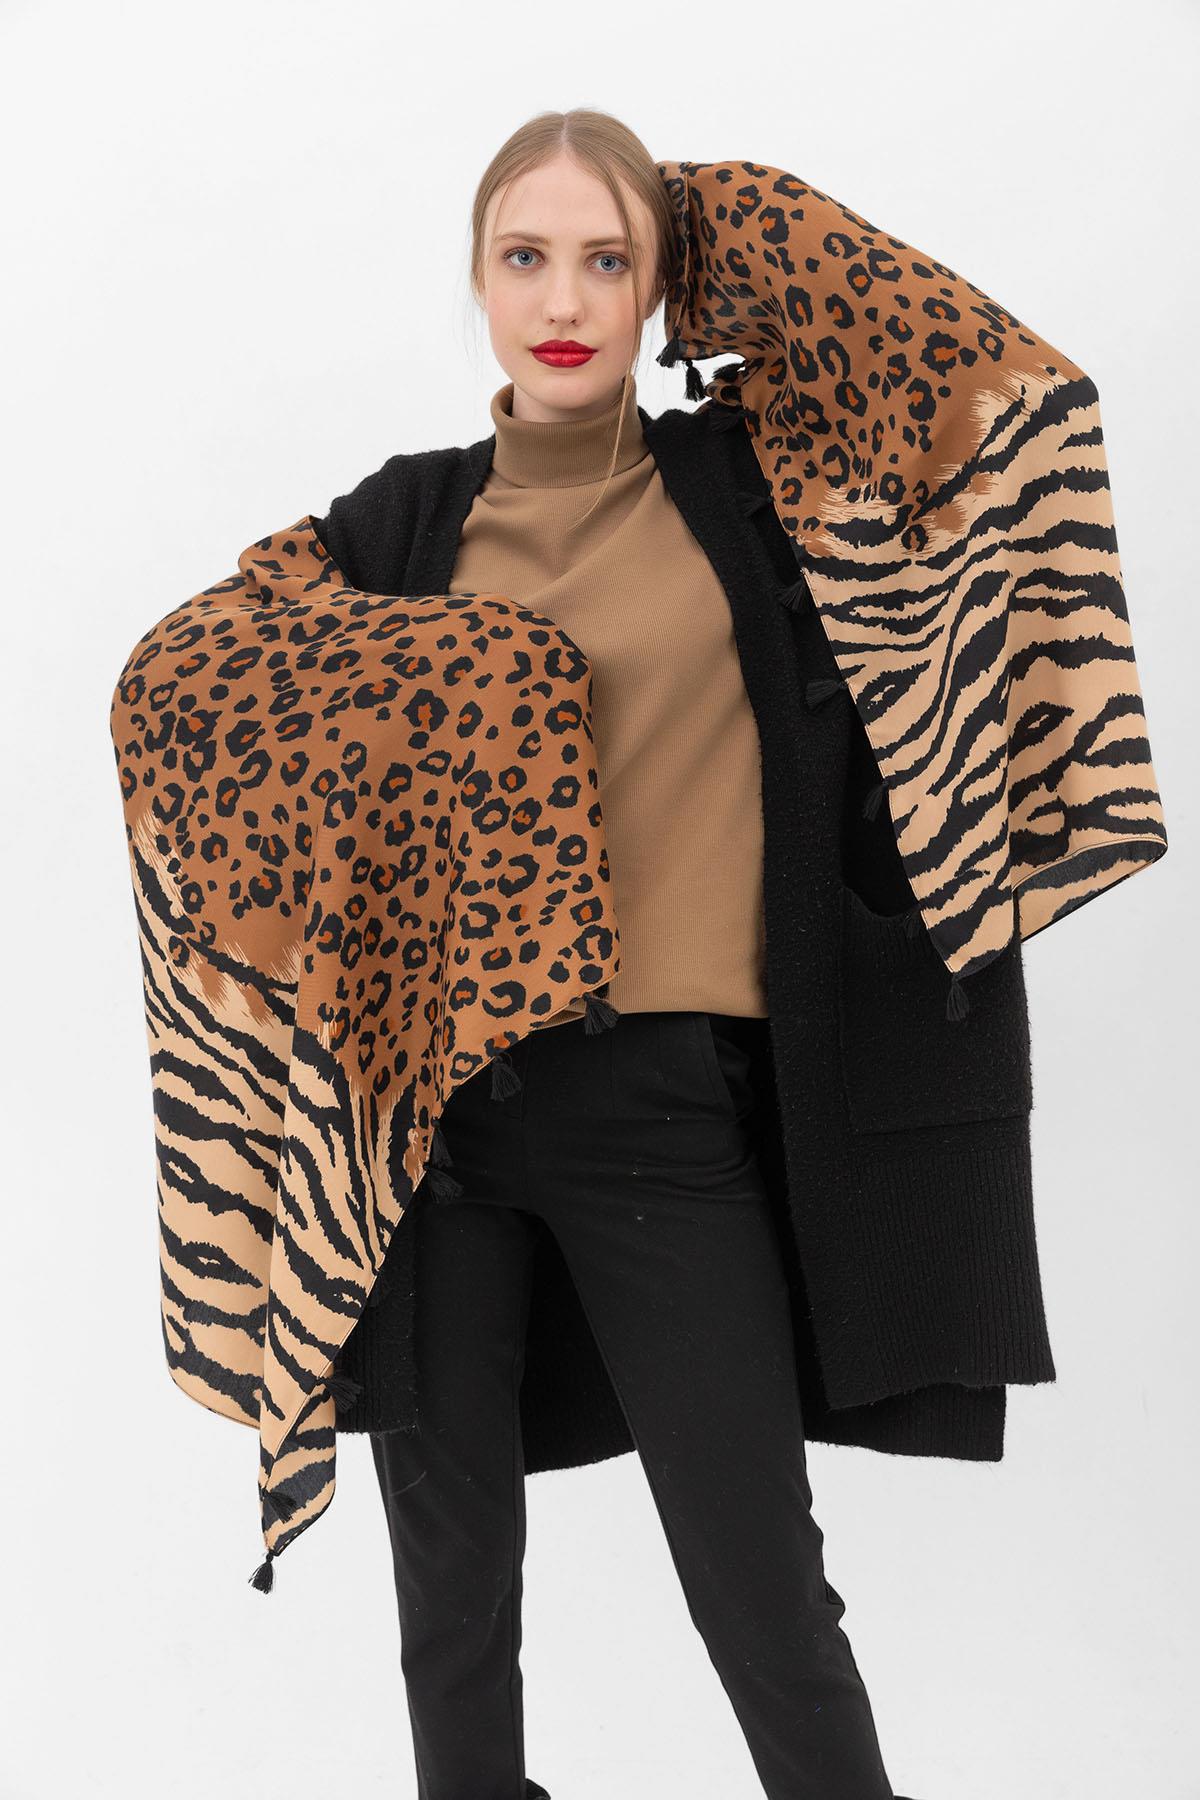 A model wears NSV11129 - Leopard Zebra Patterned Tassel Shawl - Brown, wholesale Shawl of Nesvay to display at Lonca